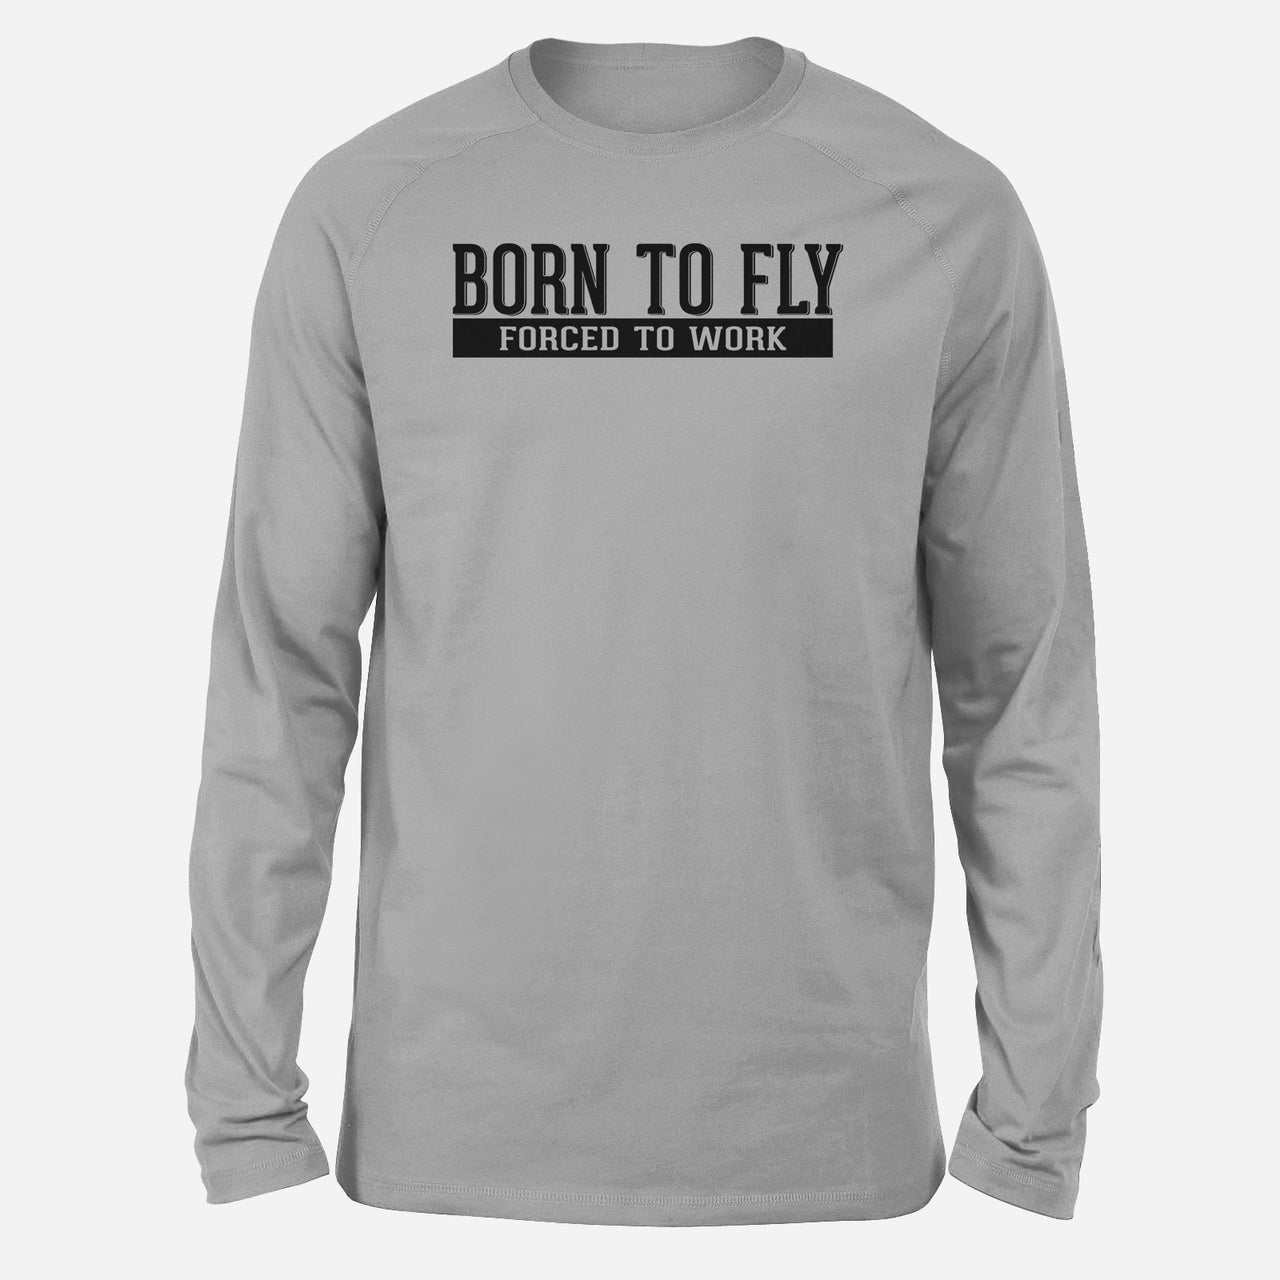 Born To Fly Forced To Work Designed Long-Sleeve T-Shirts